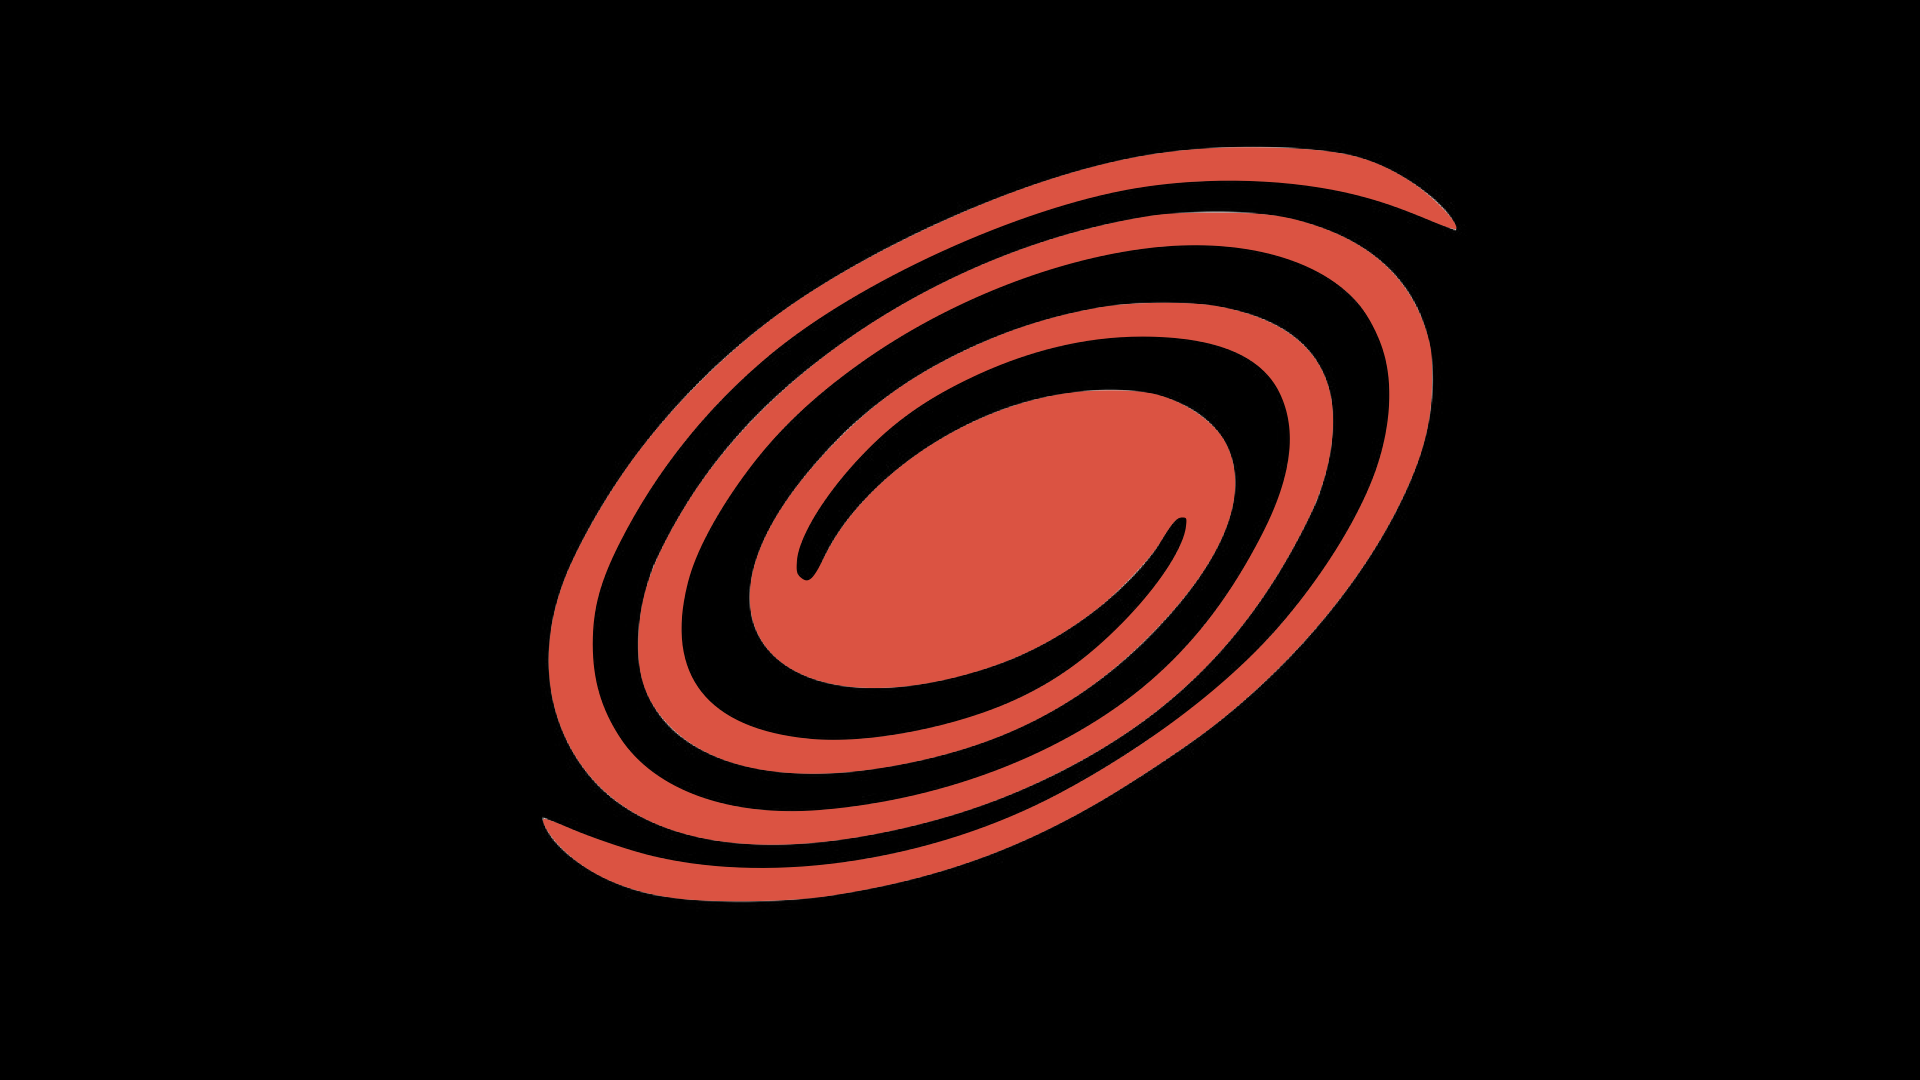 Red galaxy icon